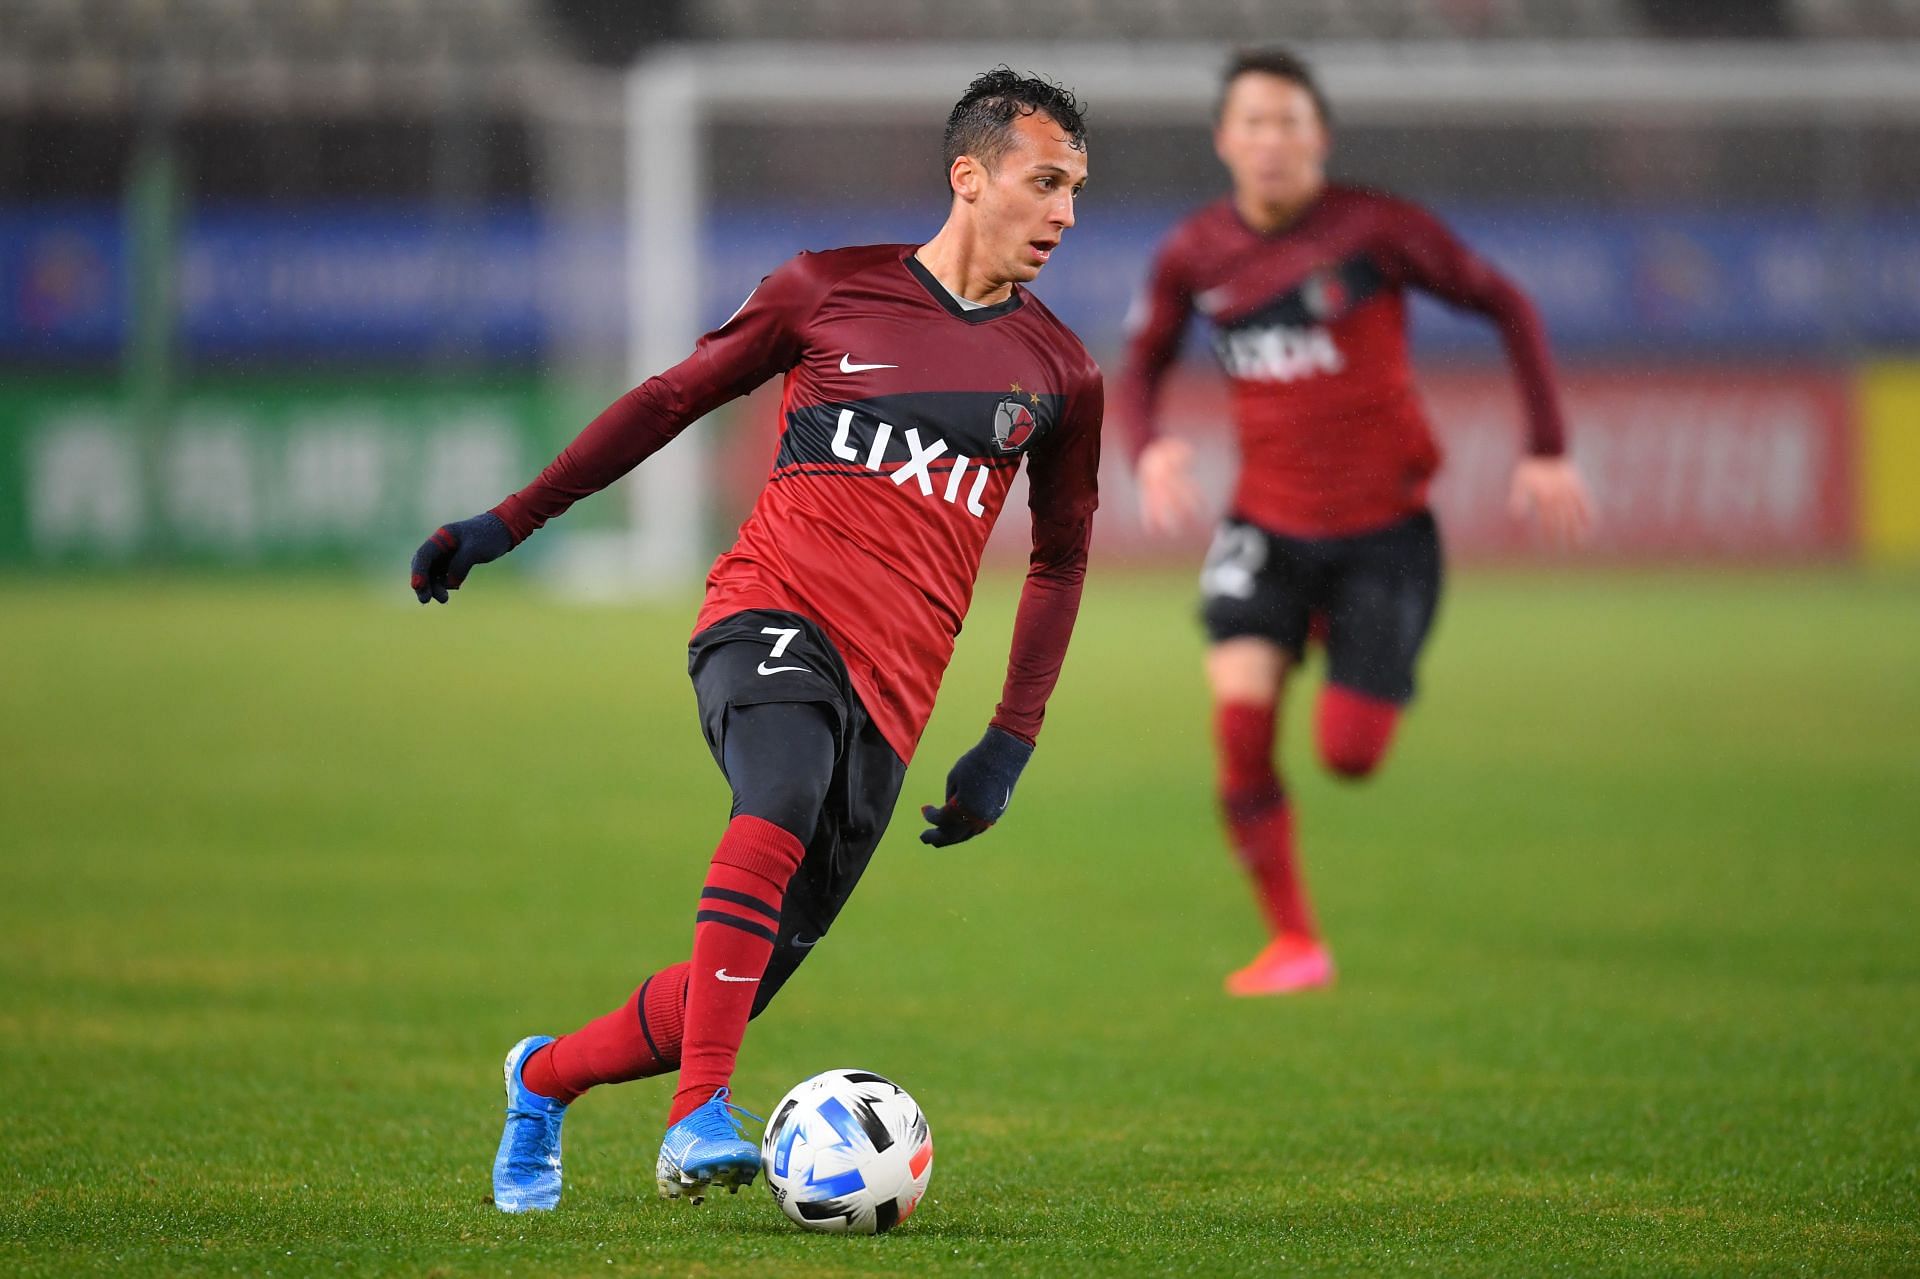 Kashima Antlers will be looking to head into the international break as the table toppers